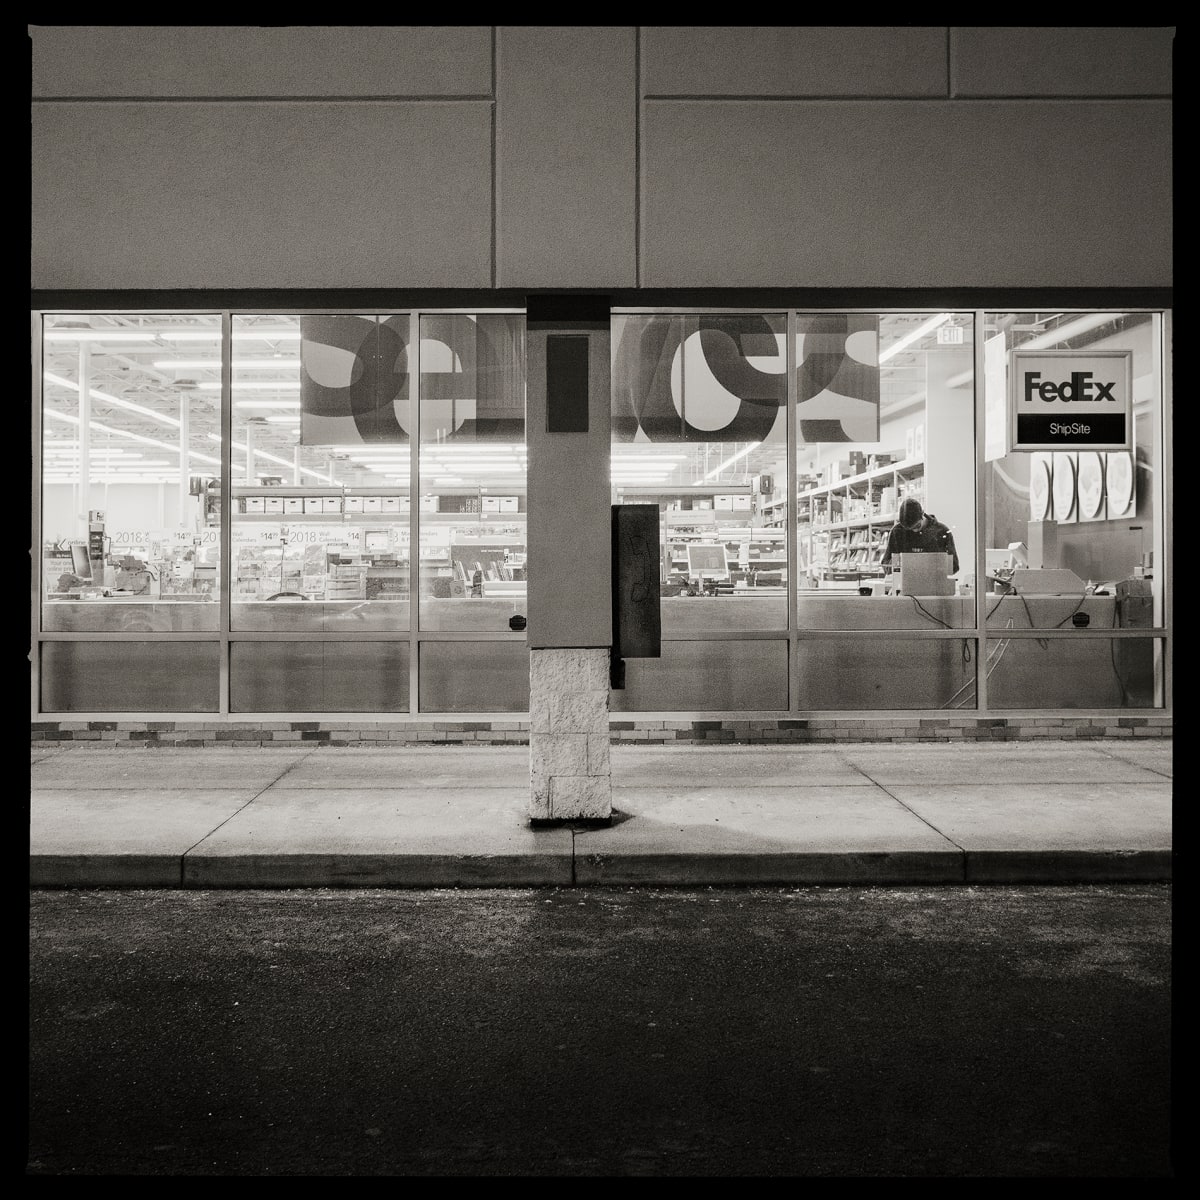 585.427.9694 – 3333 West Henrietta Road, Rochester, NY 14623 by Eric T. Kunsman  Image: ID: A black and white image shows a storefront with a pole in the center.  On the pole is a payphone.  There is a person visible through the store window.